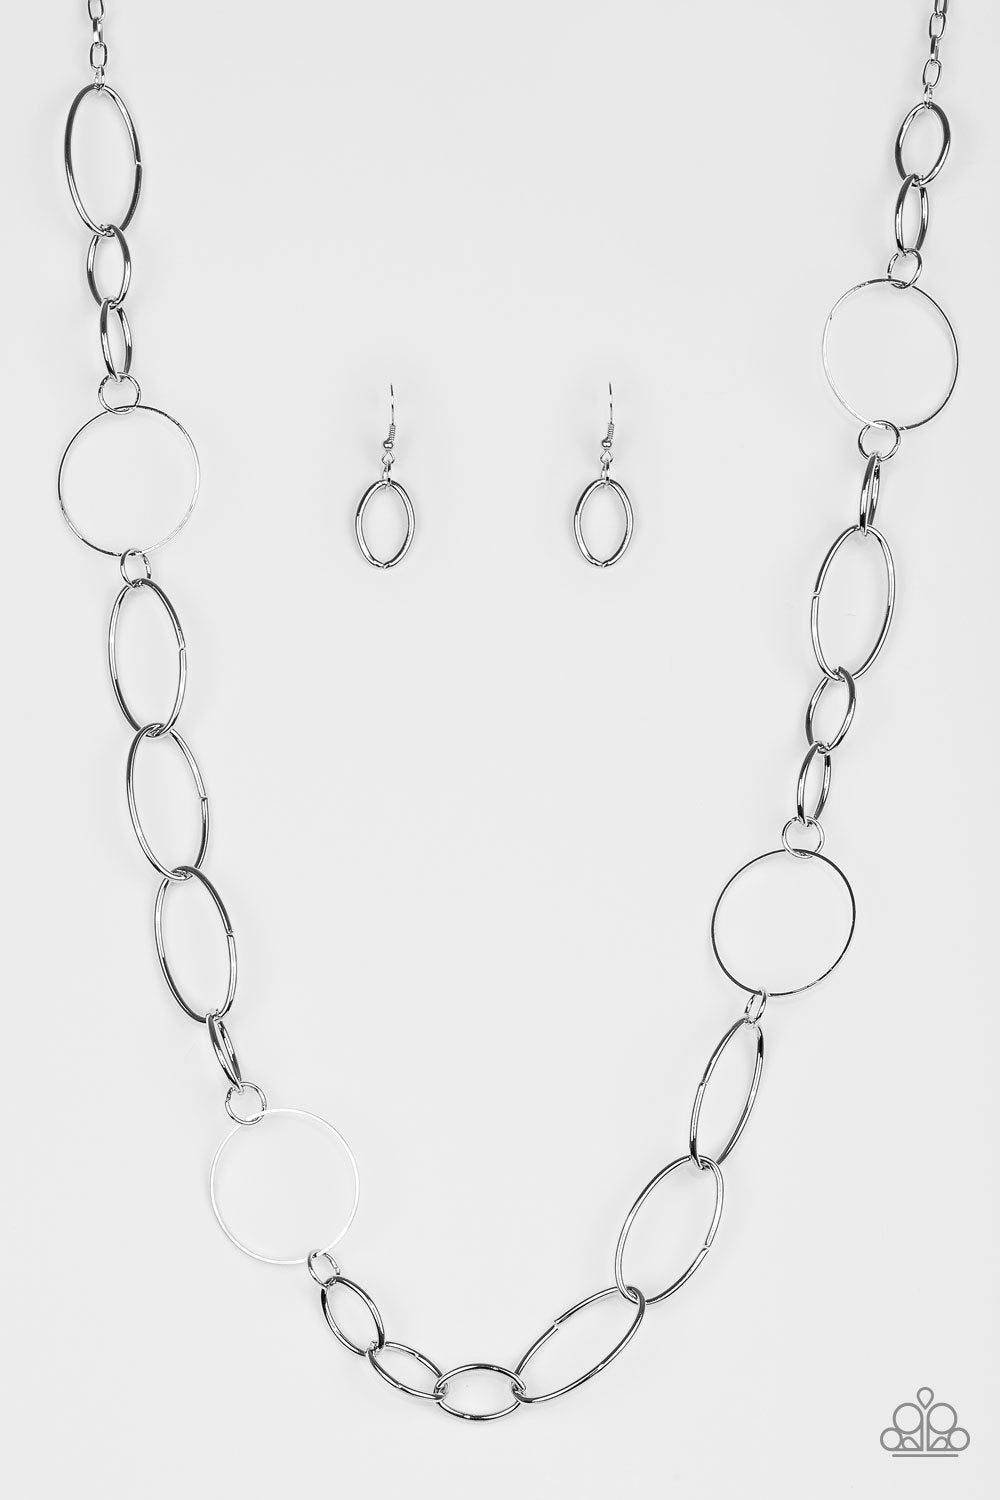 Perfect MISMATCH Silver Necklace - Paparazzi Accessories- lightbox - CarasShop.com - $5 Jewelry by Cara Jewels